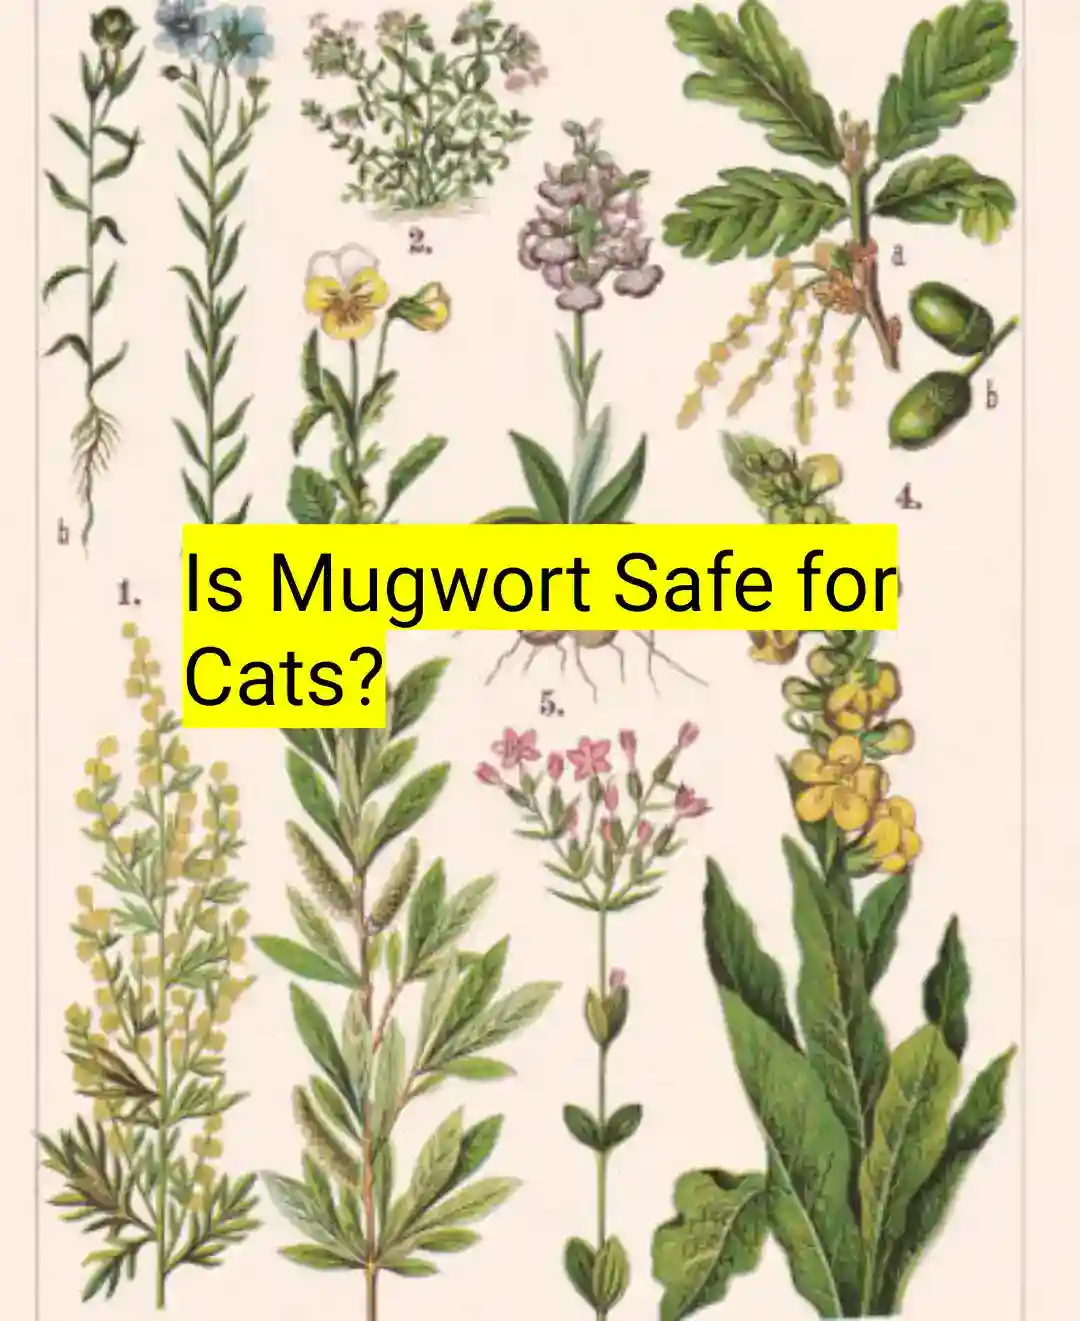 Is mugwort safe for cats?